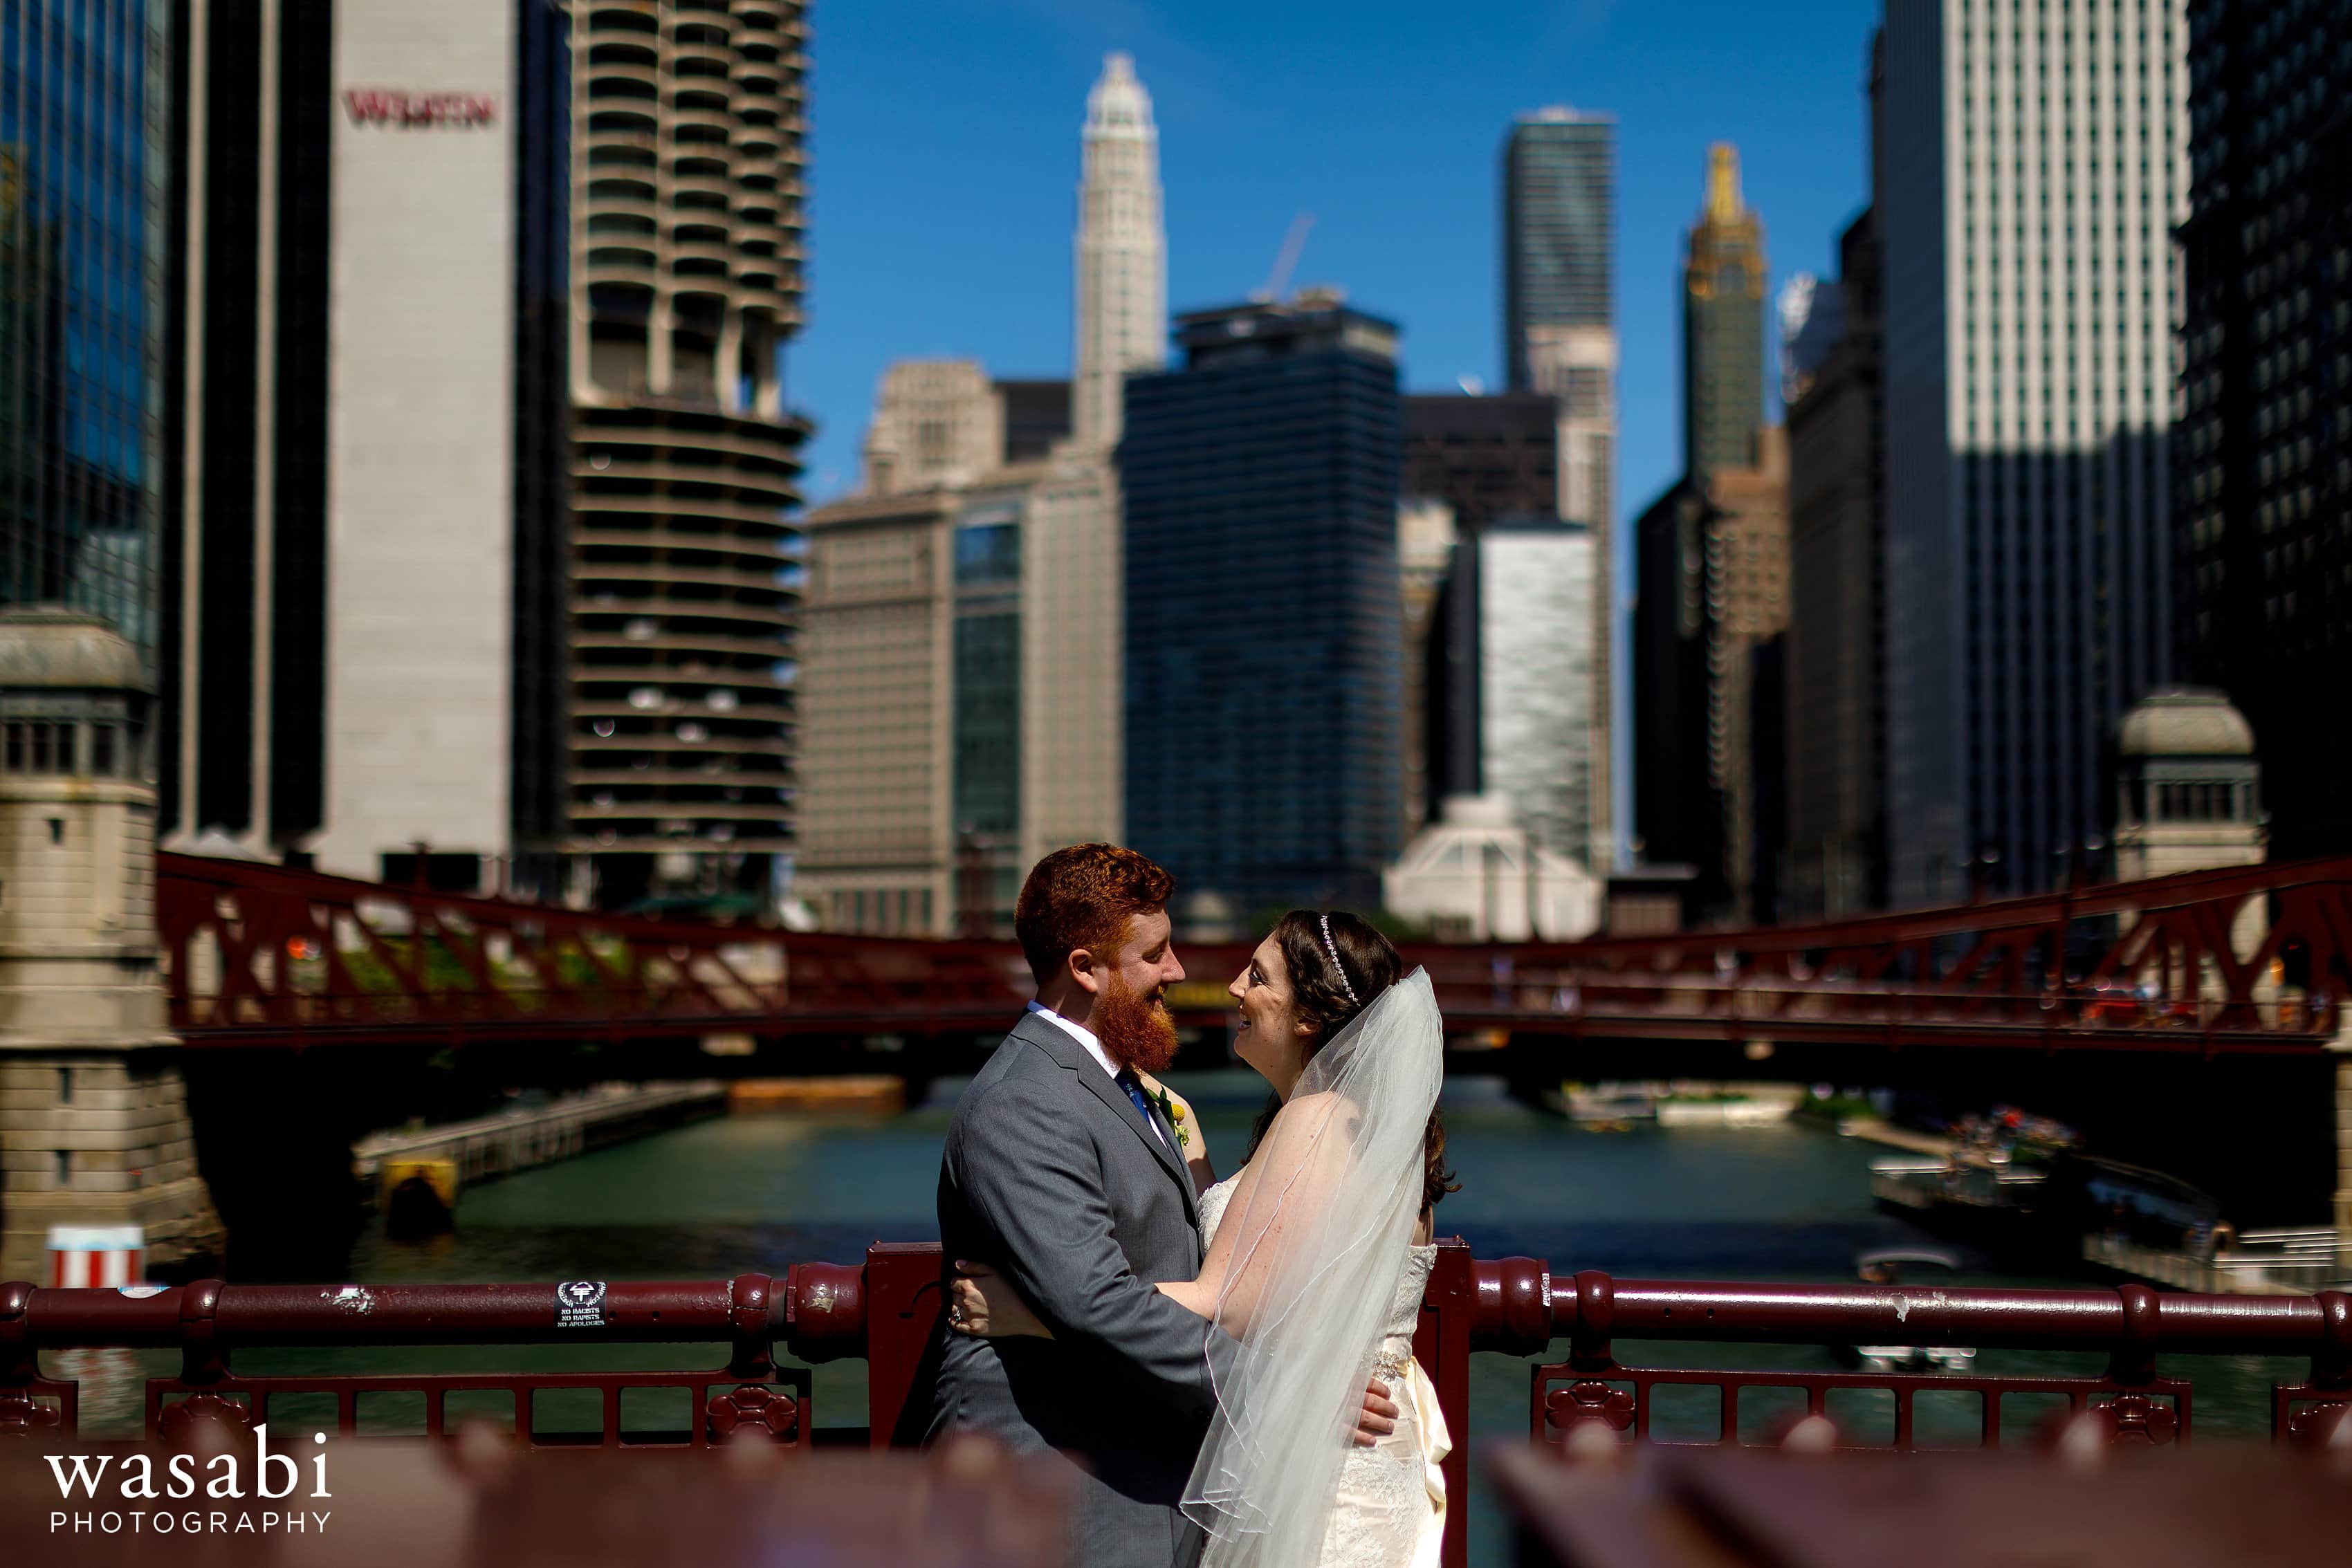 A bride and groom pose for a portrait on the La Salle Street Bridge in Chicago